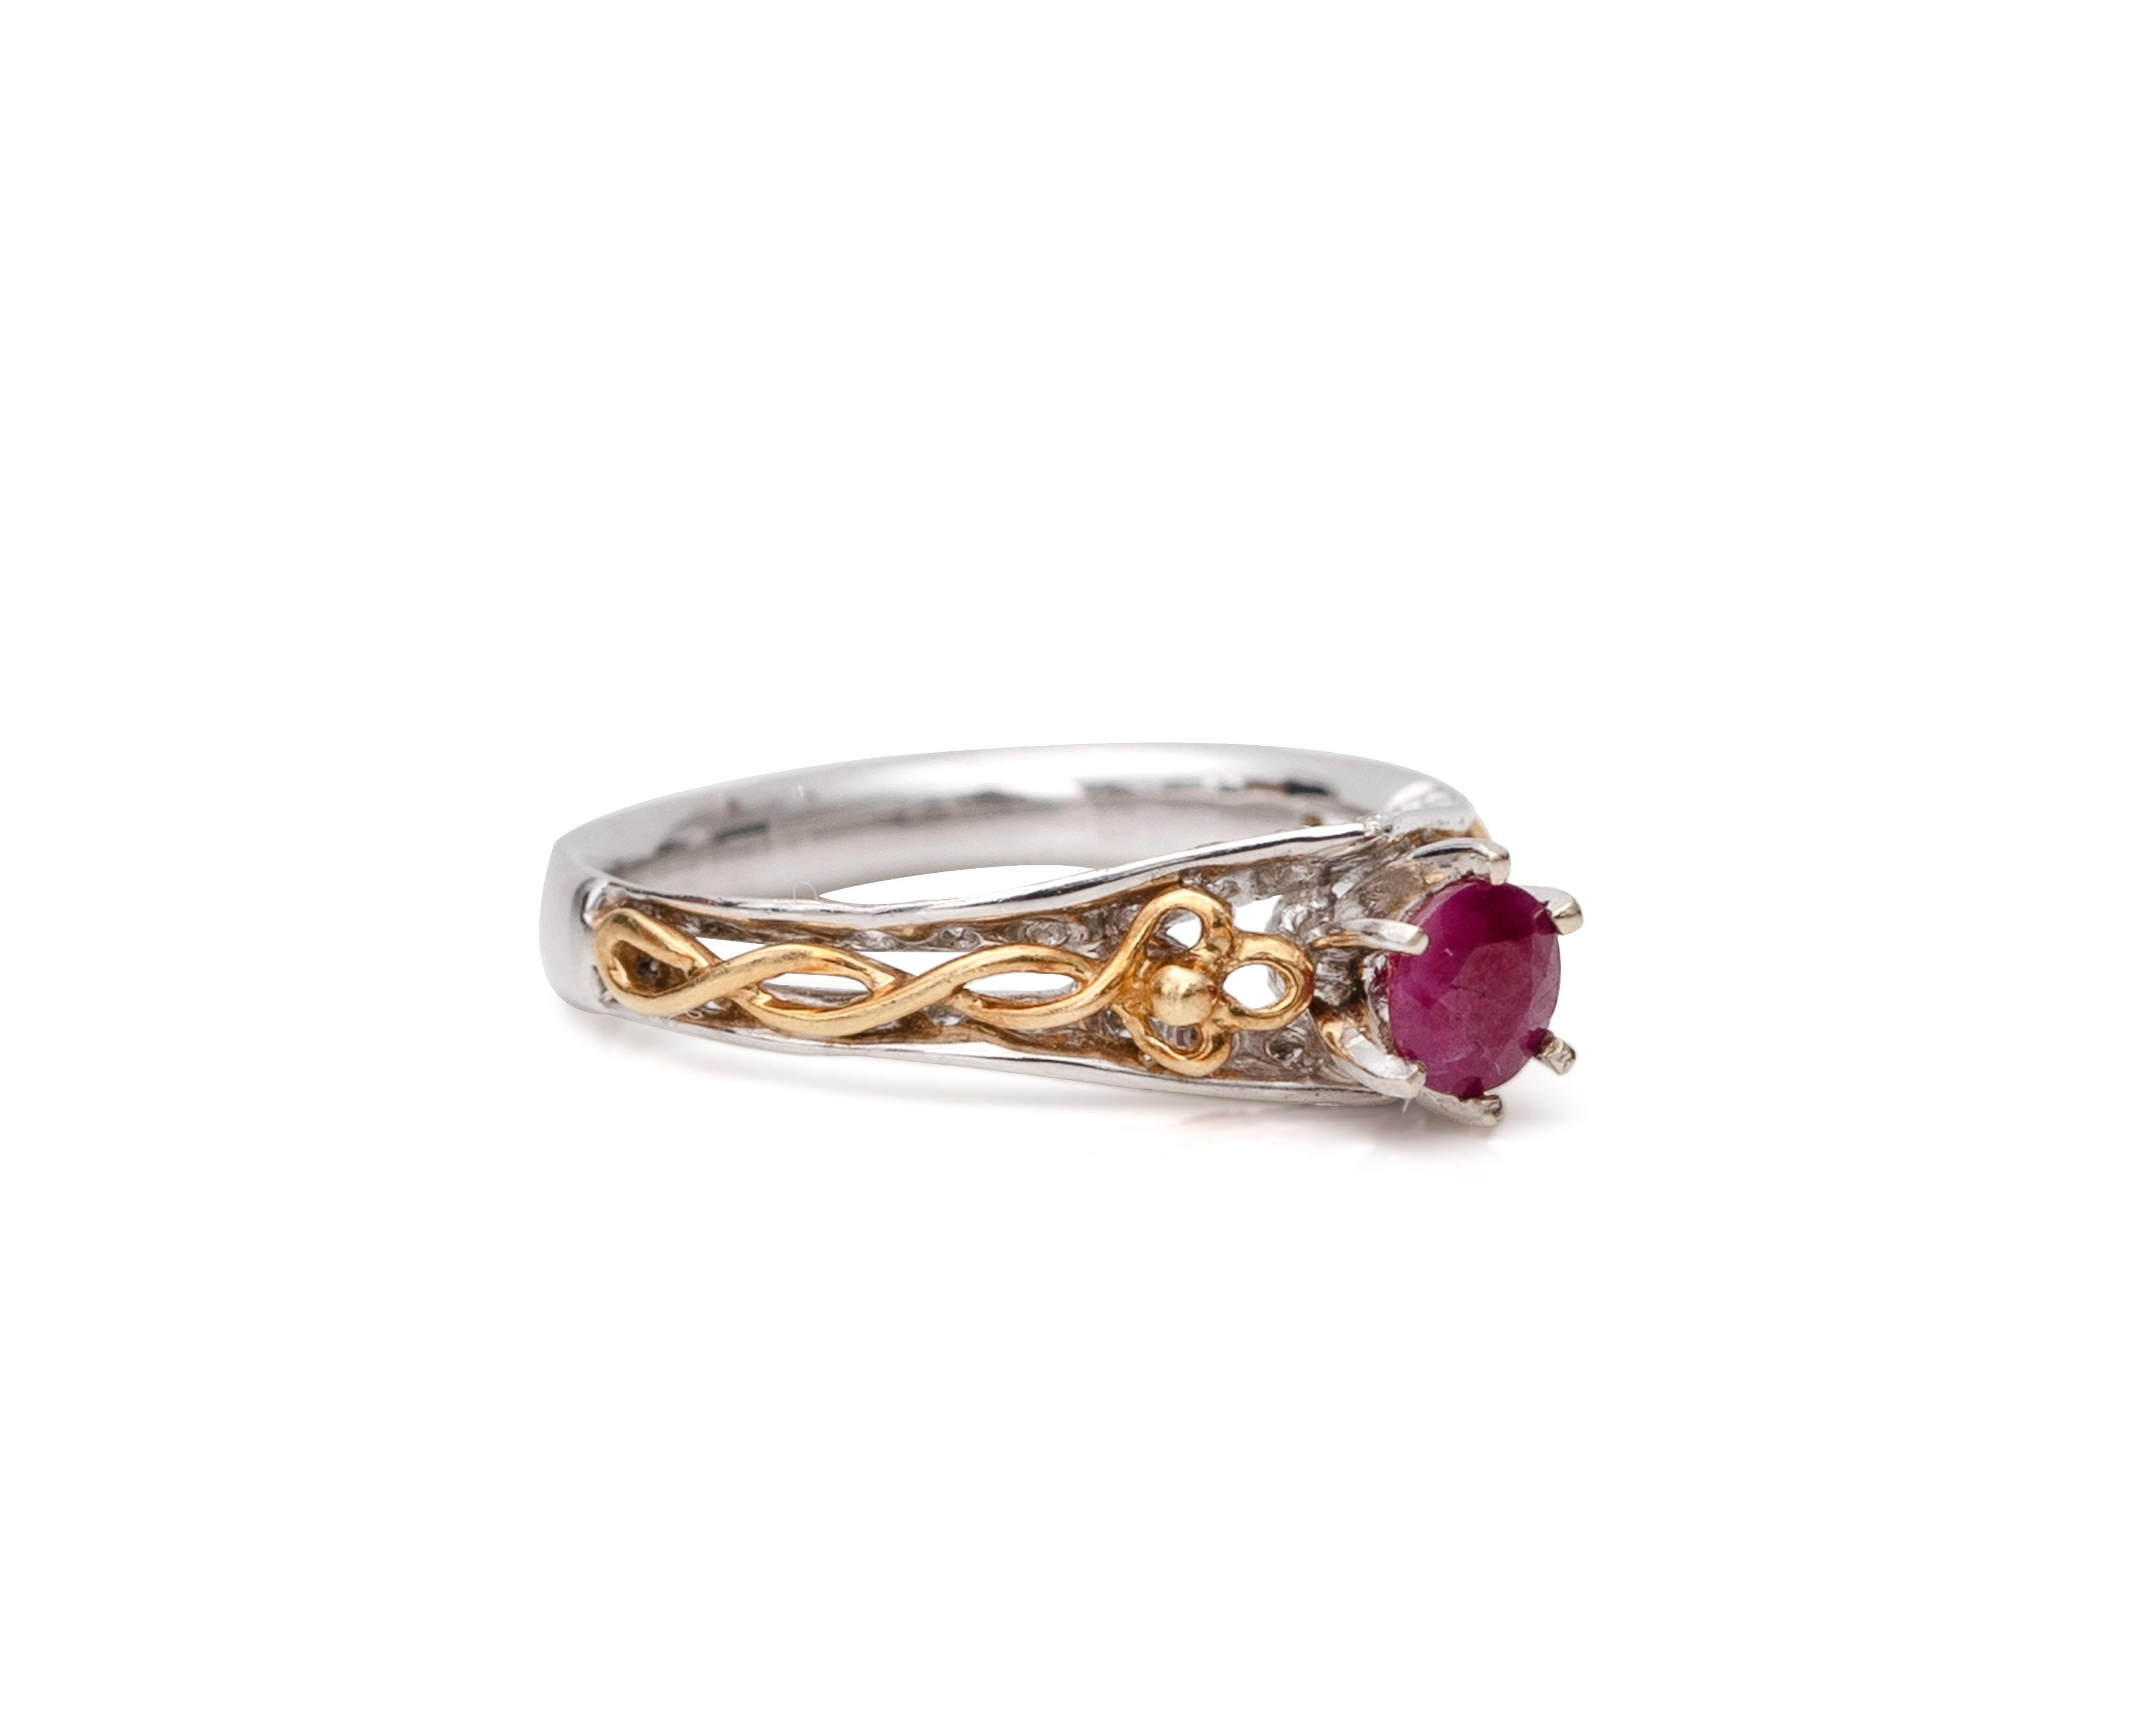 Lovely modern ring with unique two-tone design featuring a plethora of diamonds on the outer edges and a stunning 5-prong held Ruby in the center. The yellow gold features an intertwined braided design between the two white gold rows. 

Ring